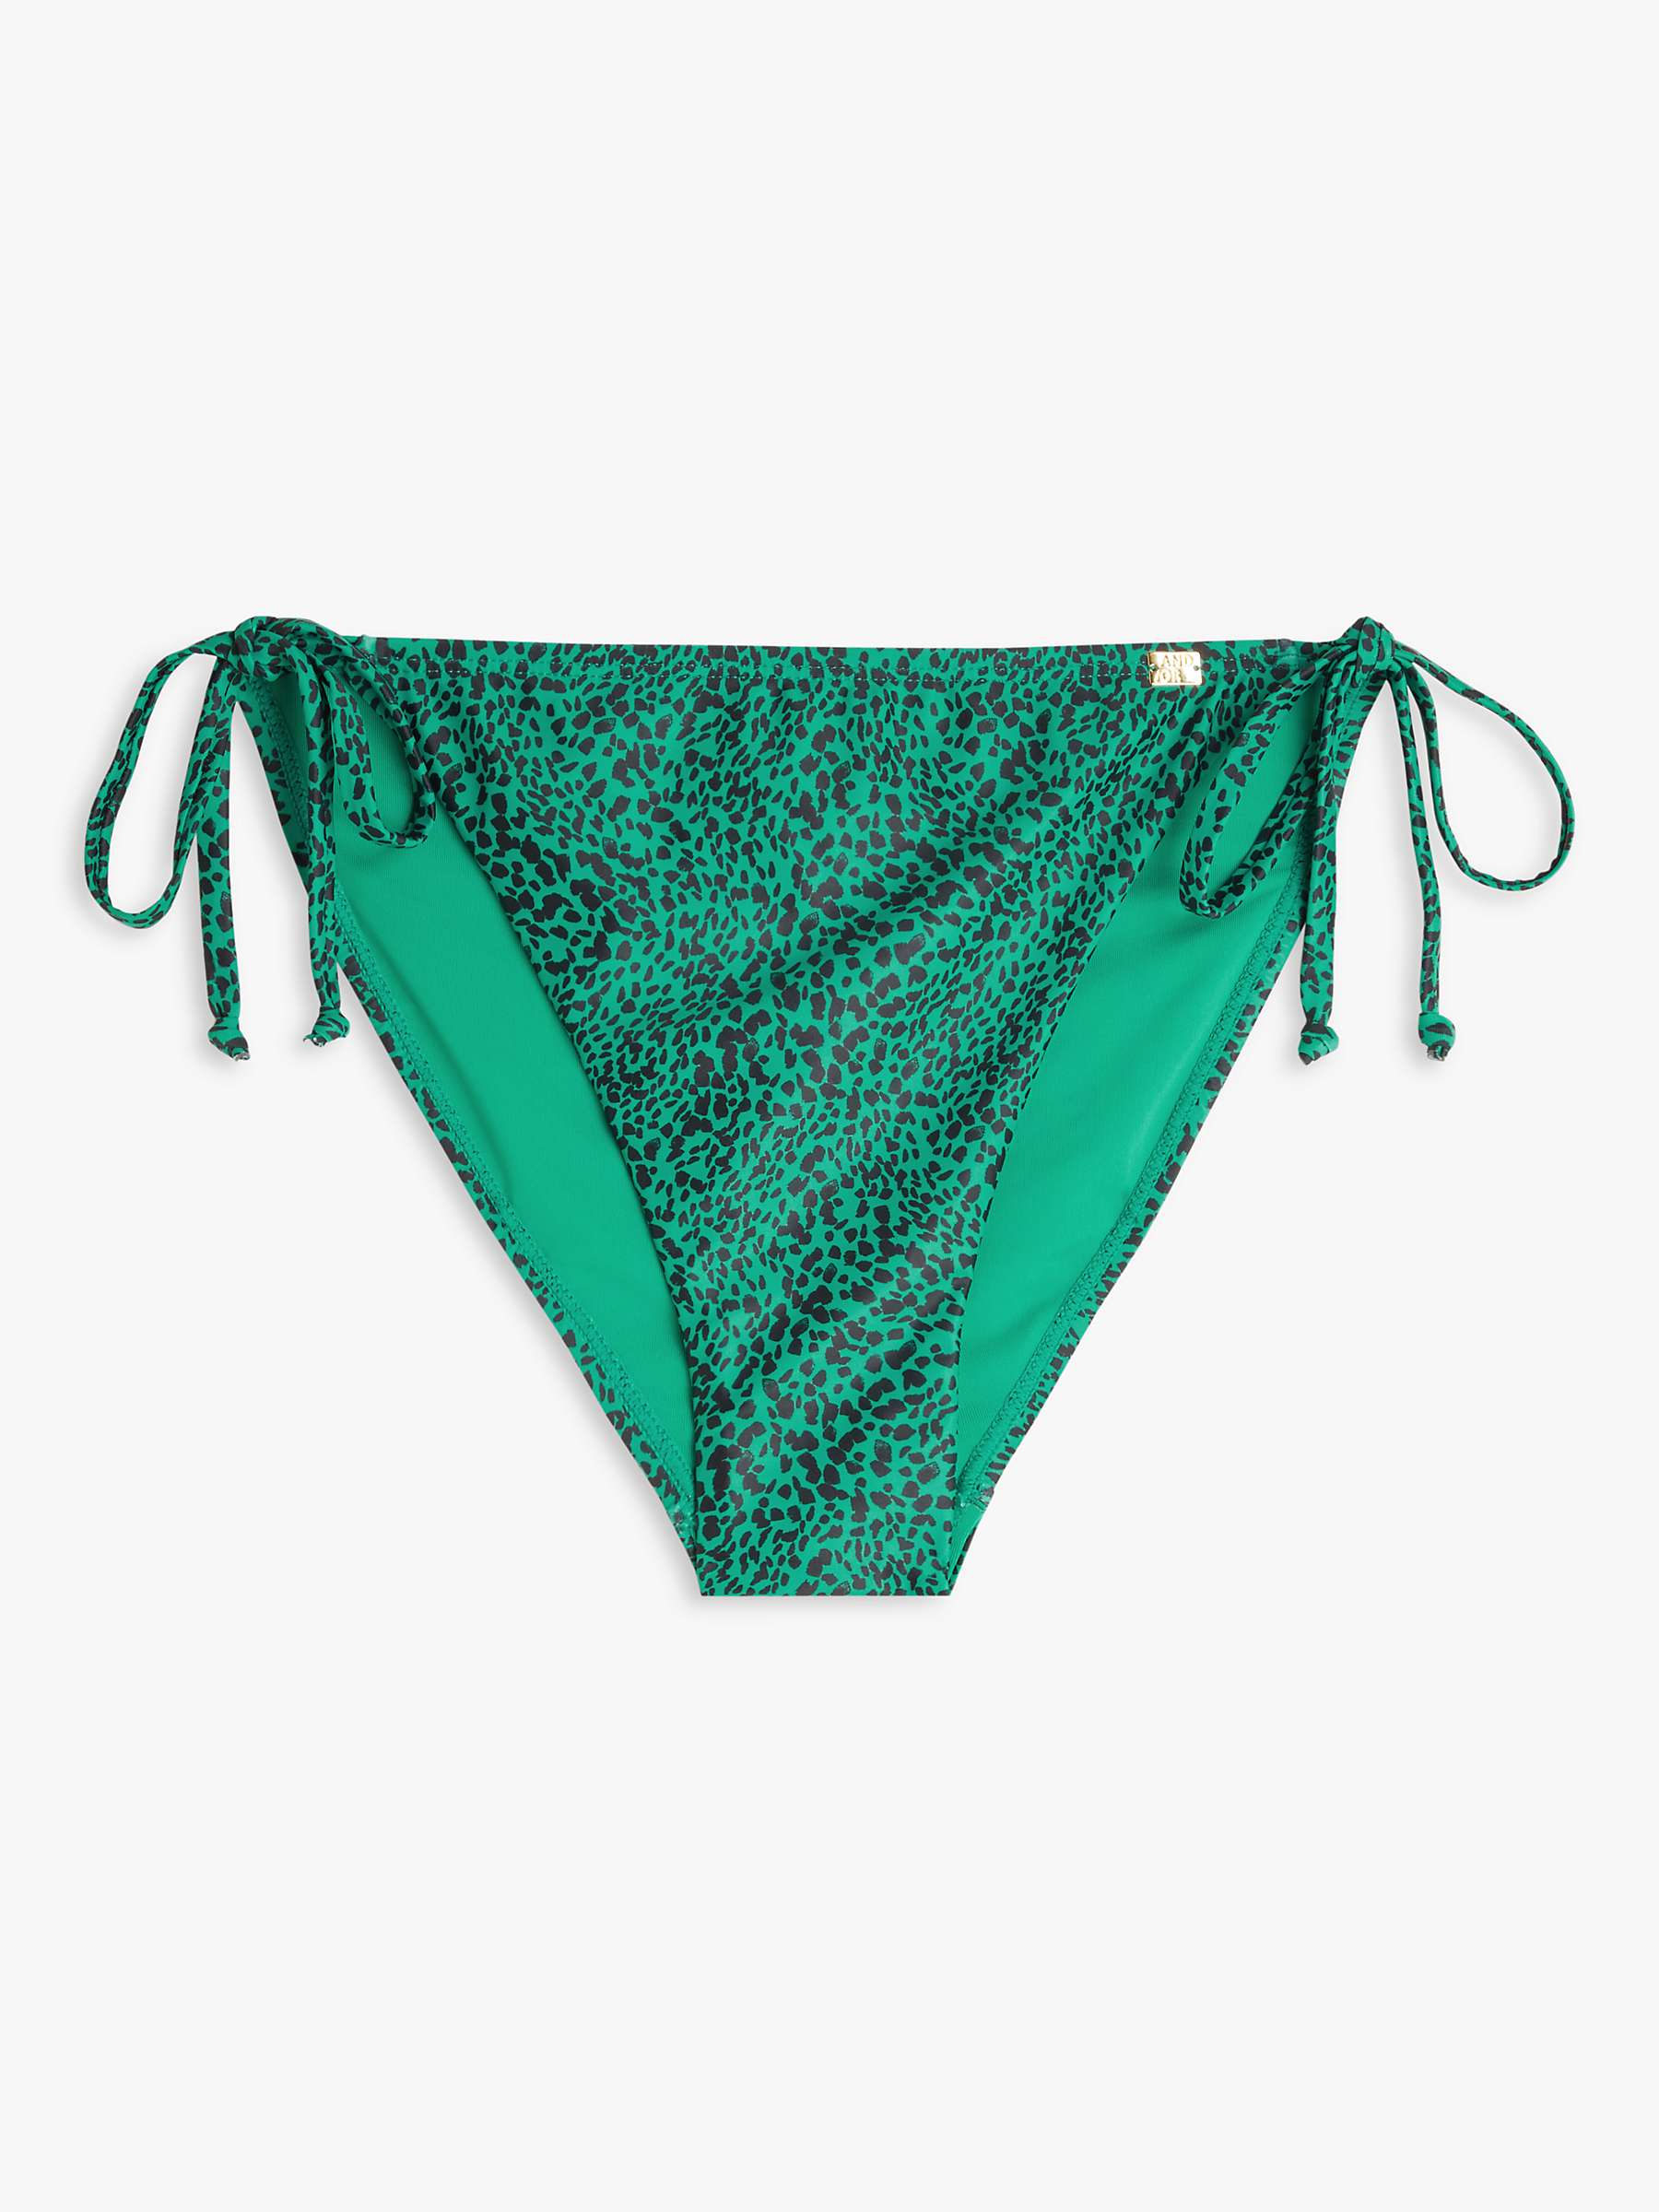 Buy AND/OR Jungle Smooth Bikini Bottoms, Green Online at johnlewis.com